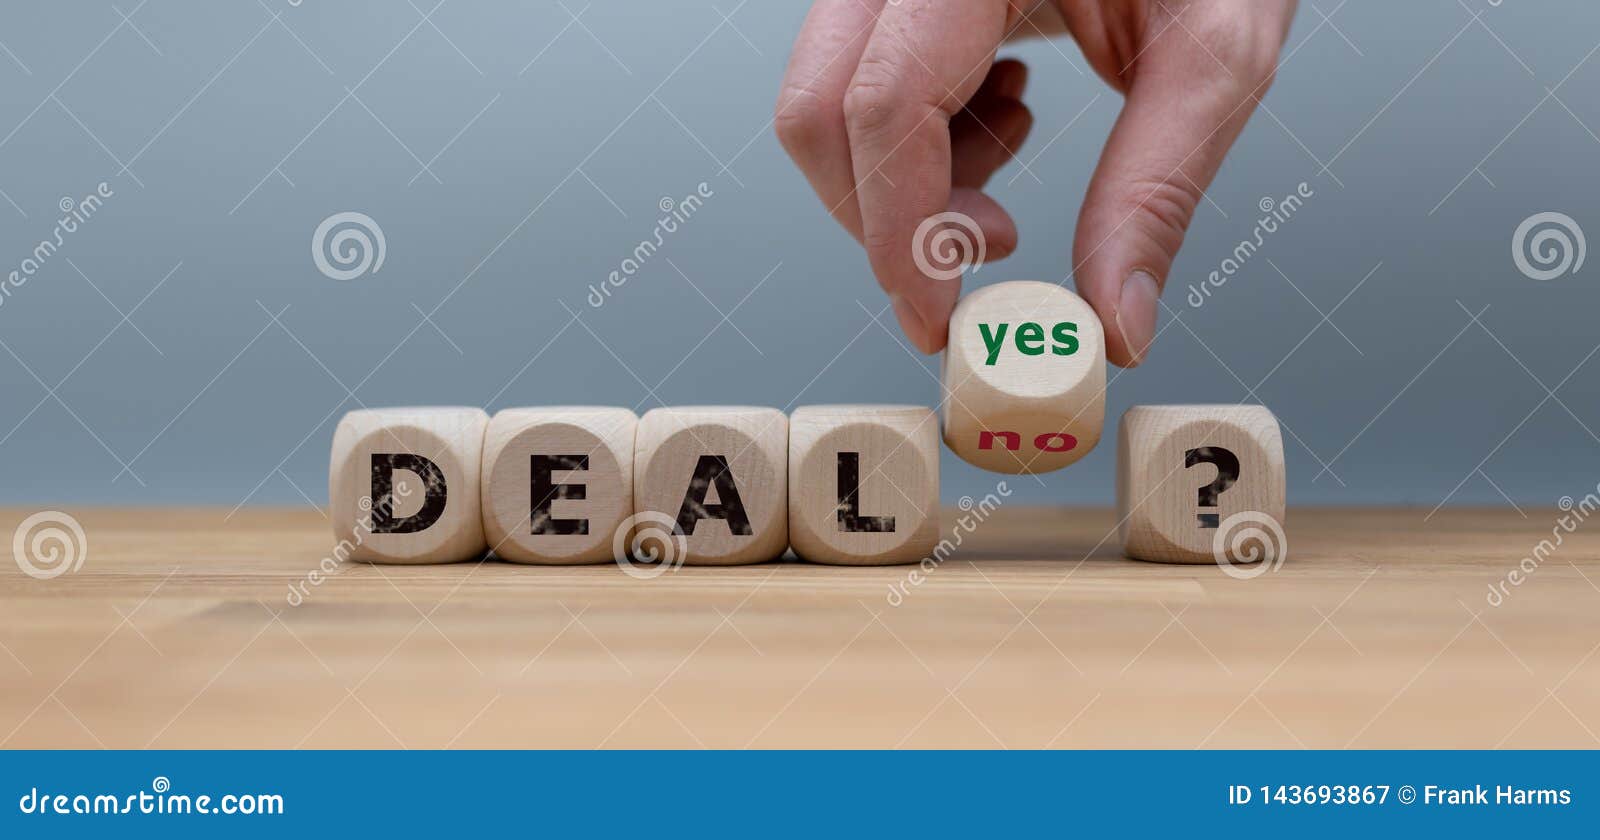 deal or no deal?